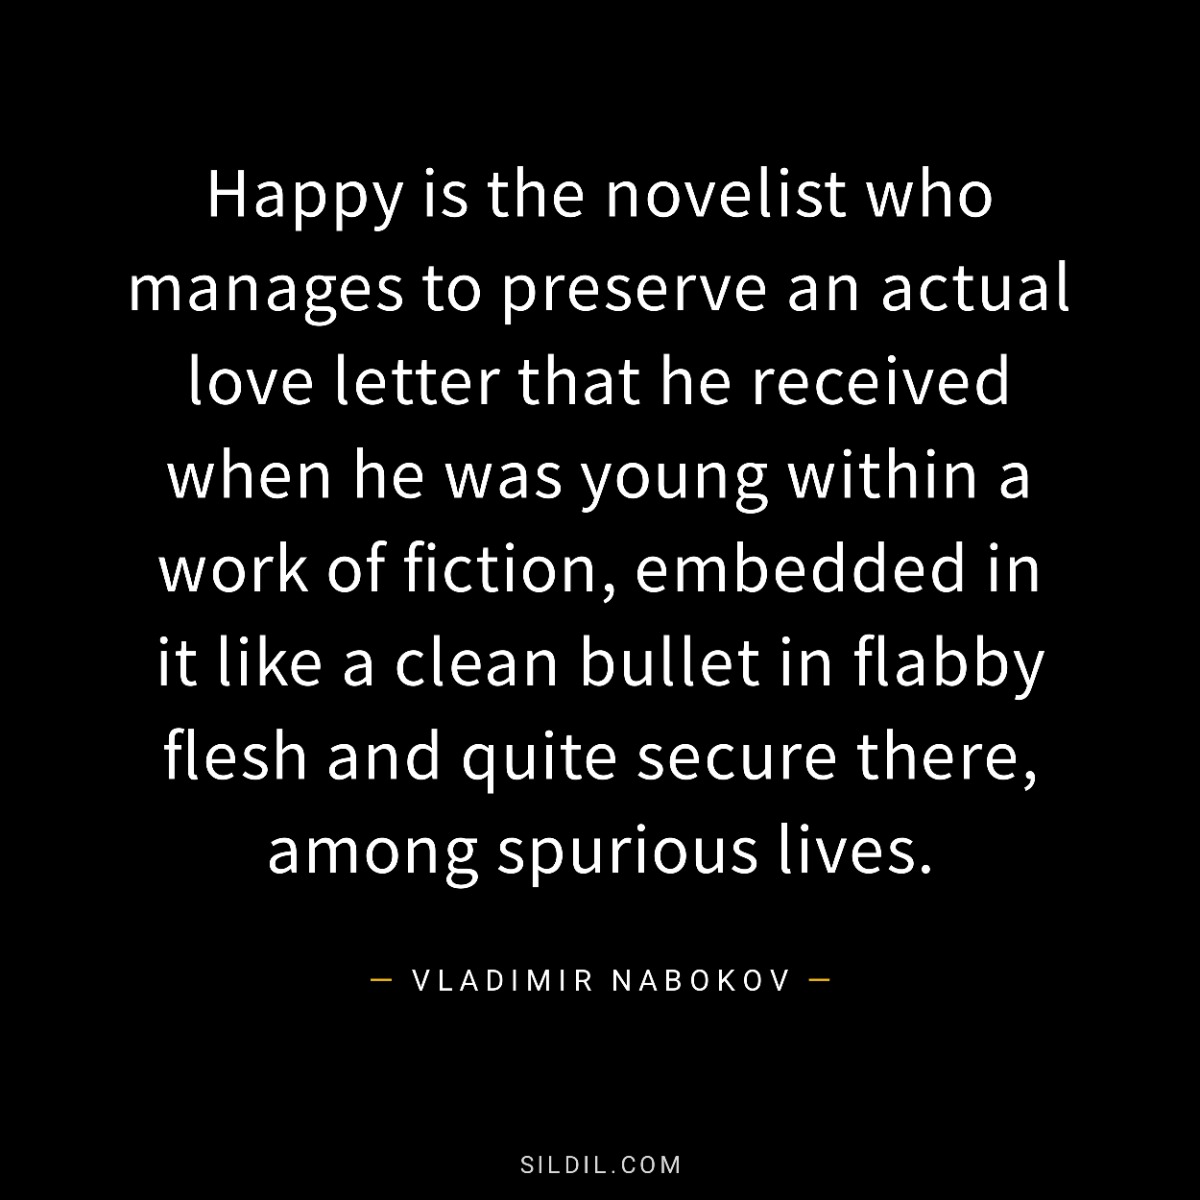 Happy is the novelist who manages to preserve an actual love letter that he received when he was young within a work of fiction, embedded in it like a clean bullet in flabby flesh and quite secure there, among spurious lives.